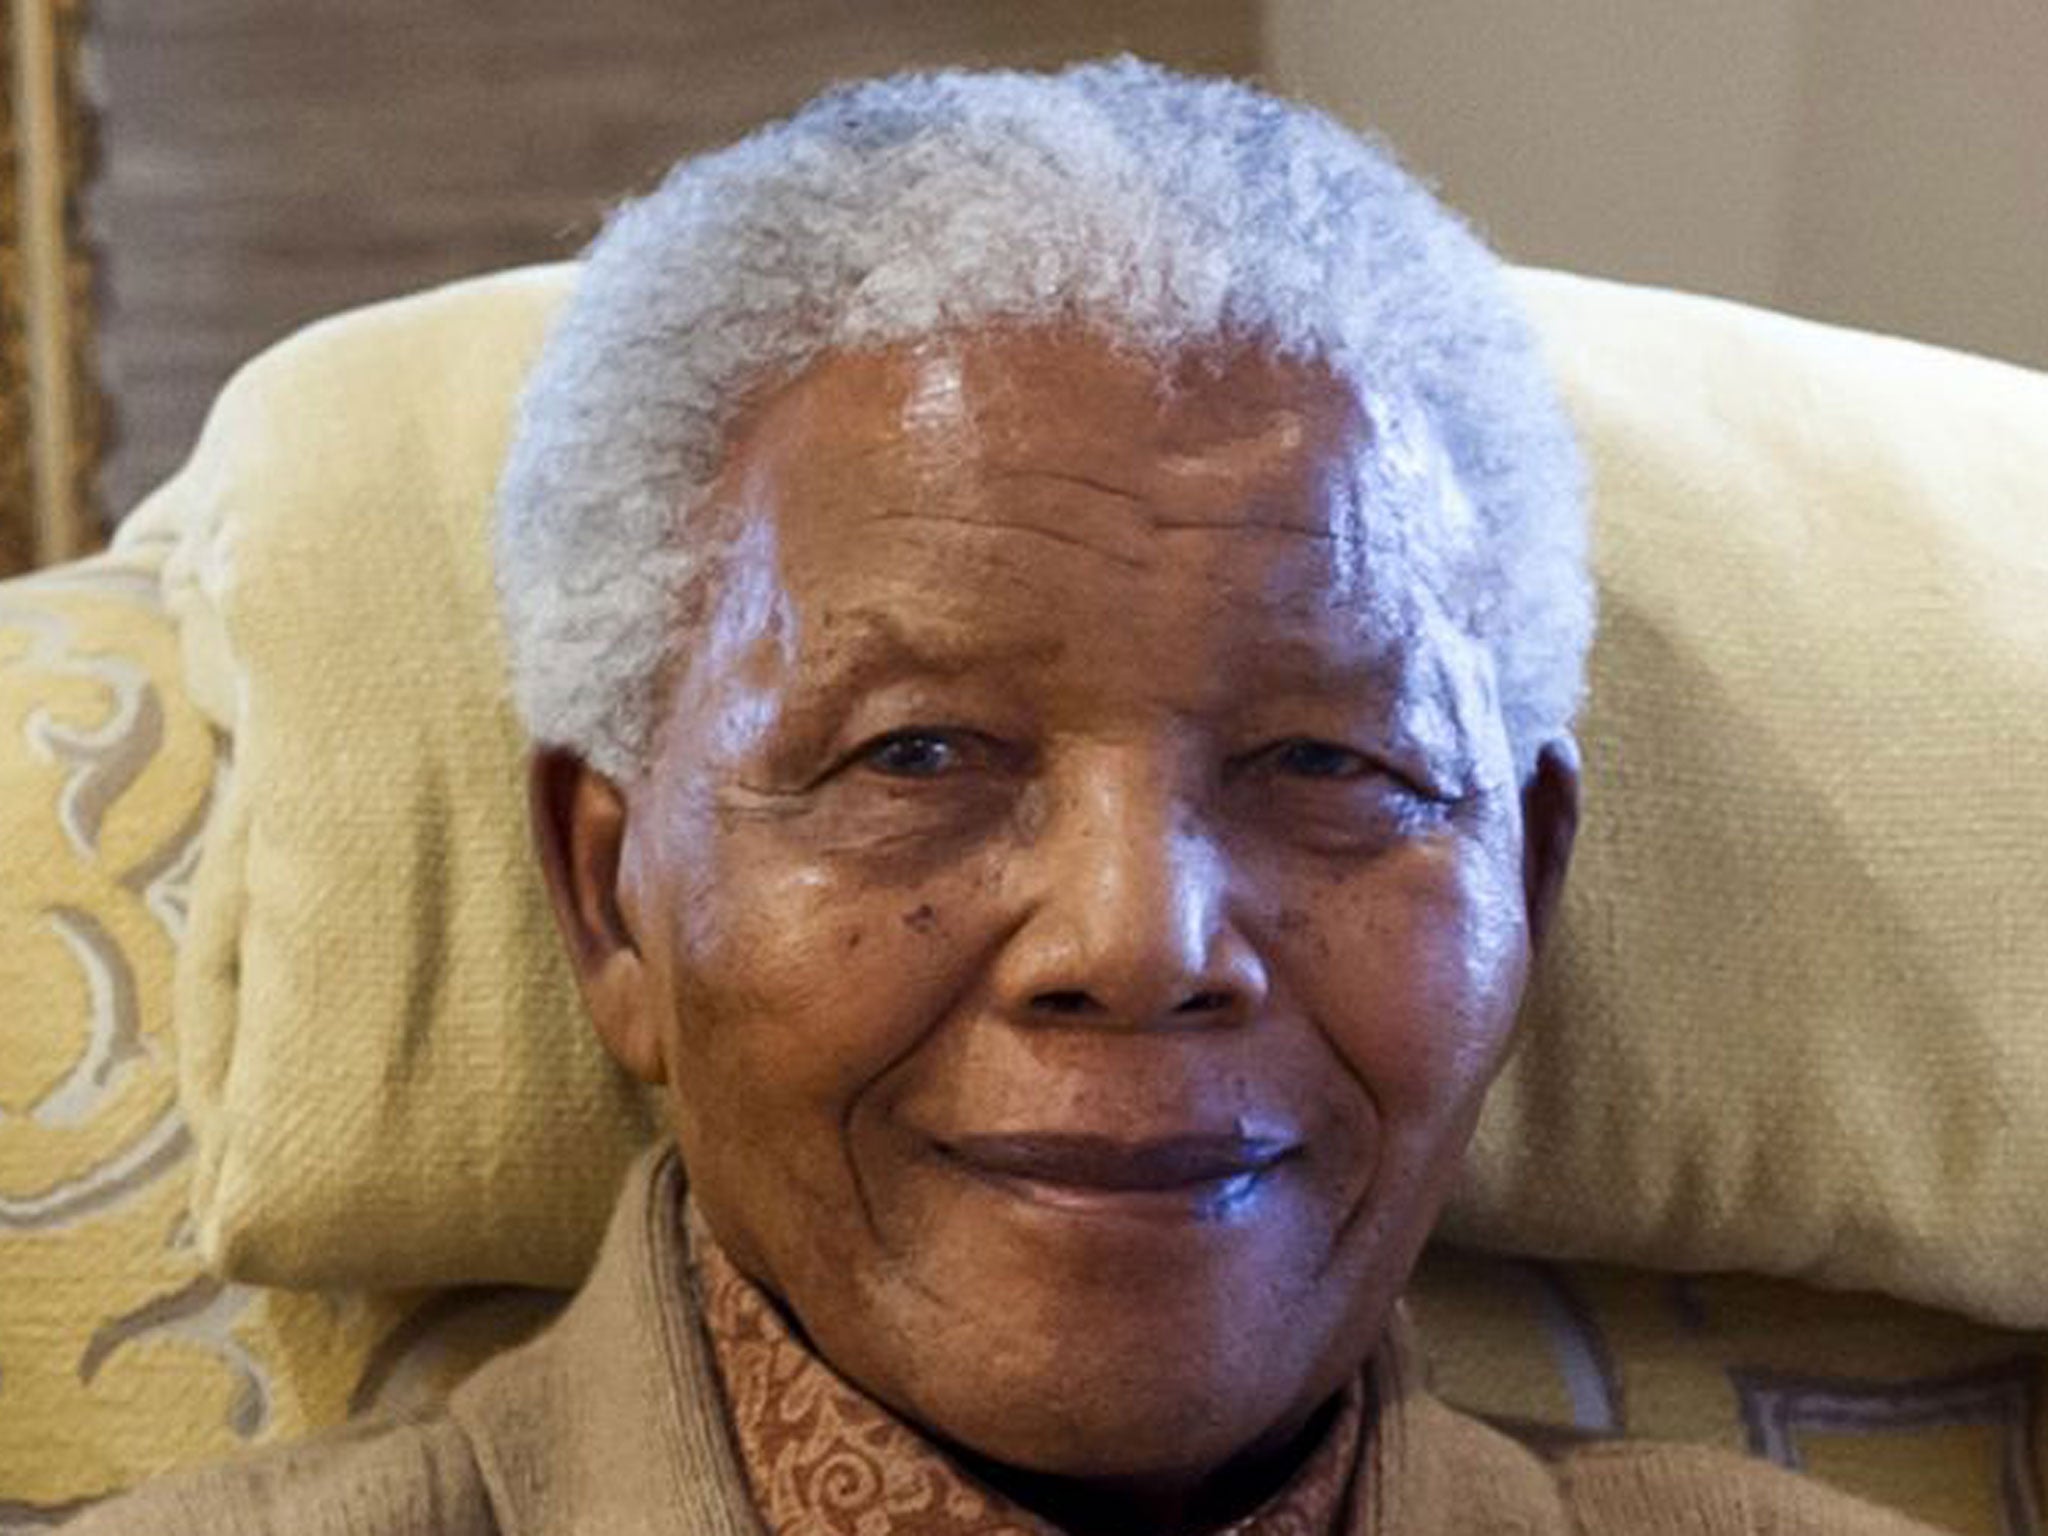 Mr Mandela's condition had become critical in the past 24 hours, the South African presidency said